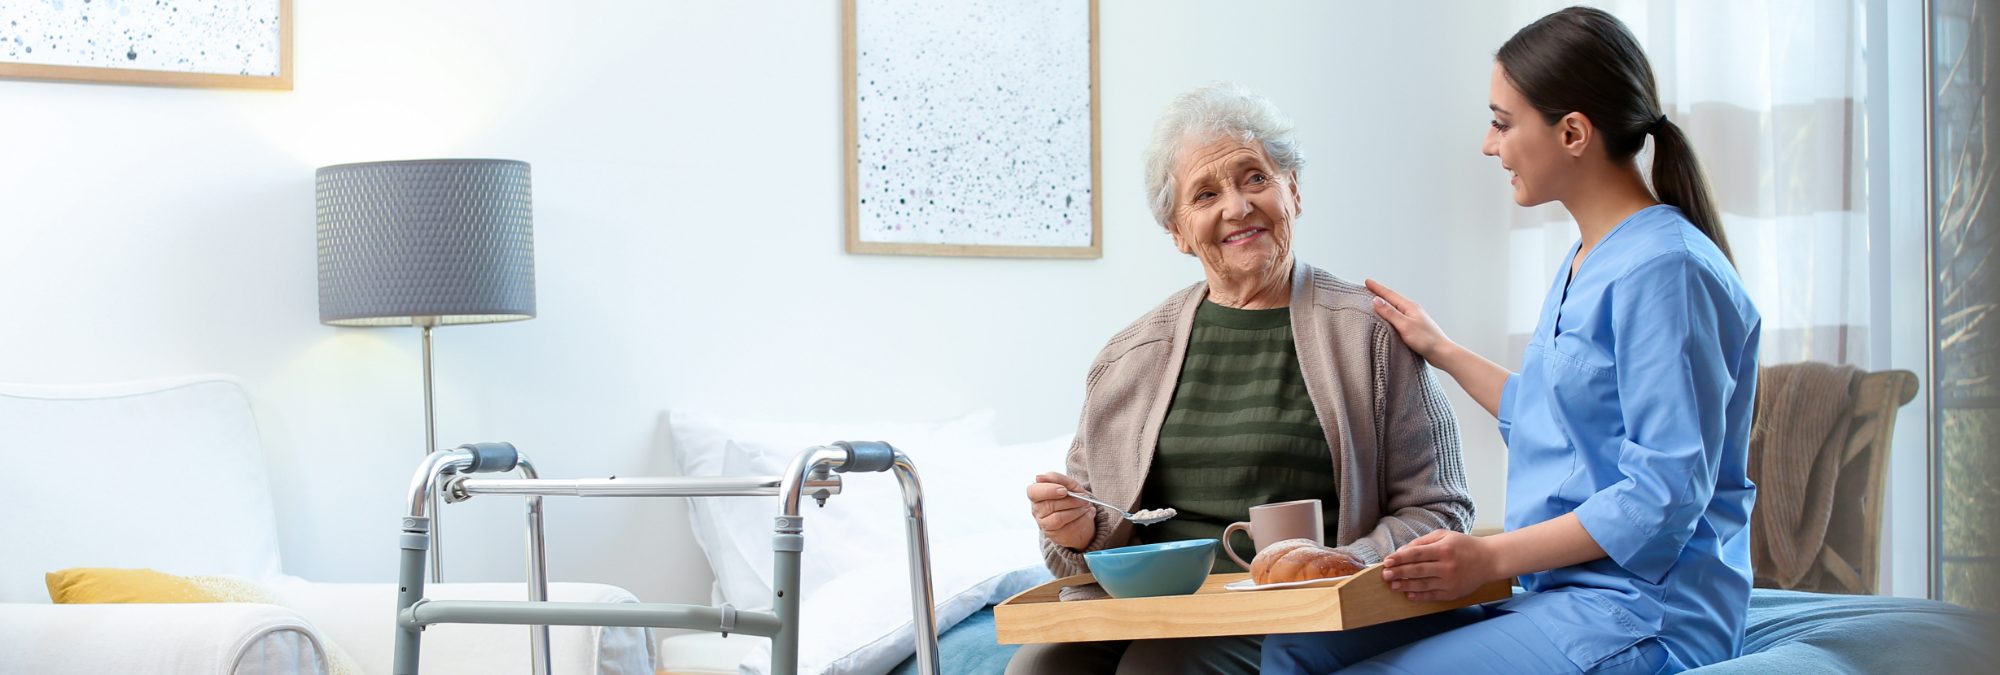 A Closer Look at Geriatric Nursing: How to Start a Fulfilling Career in Senior Healthcare